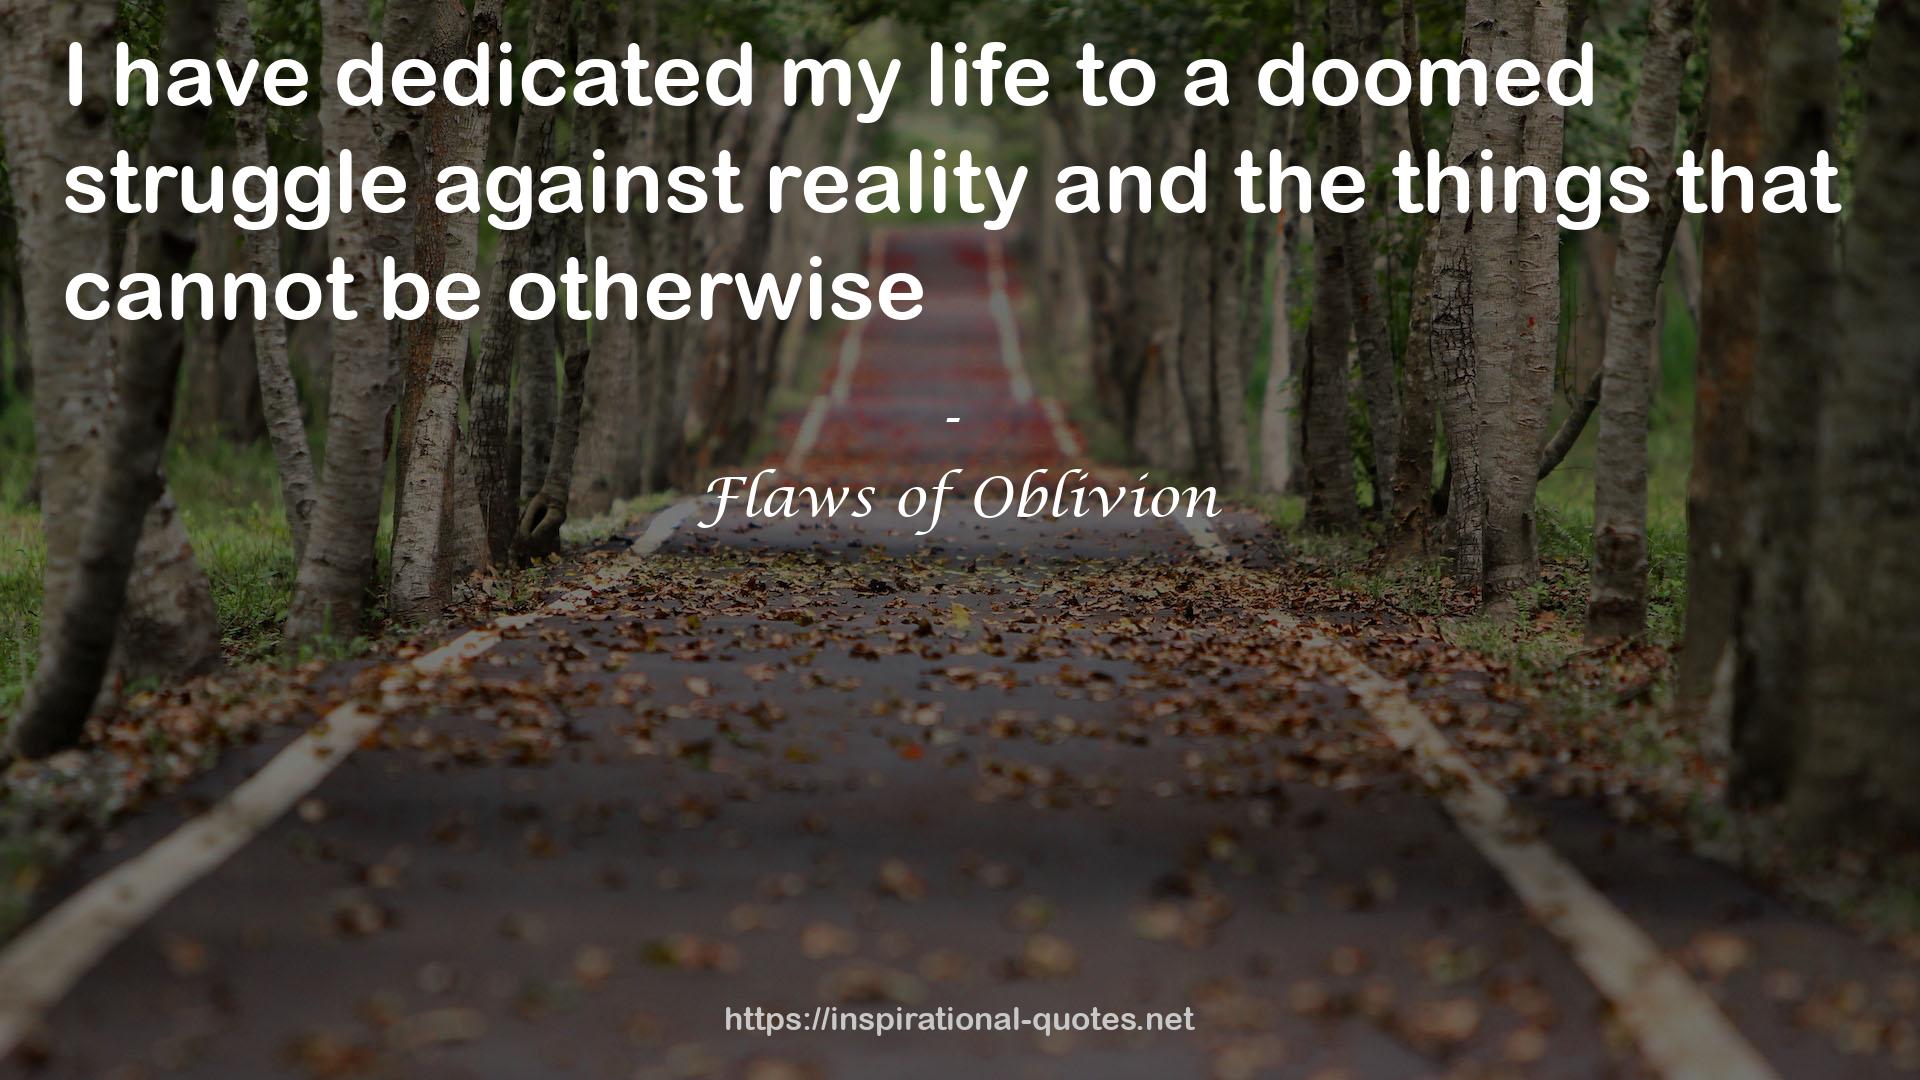 Flaws of Oblivion QUOTES